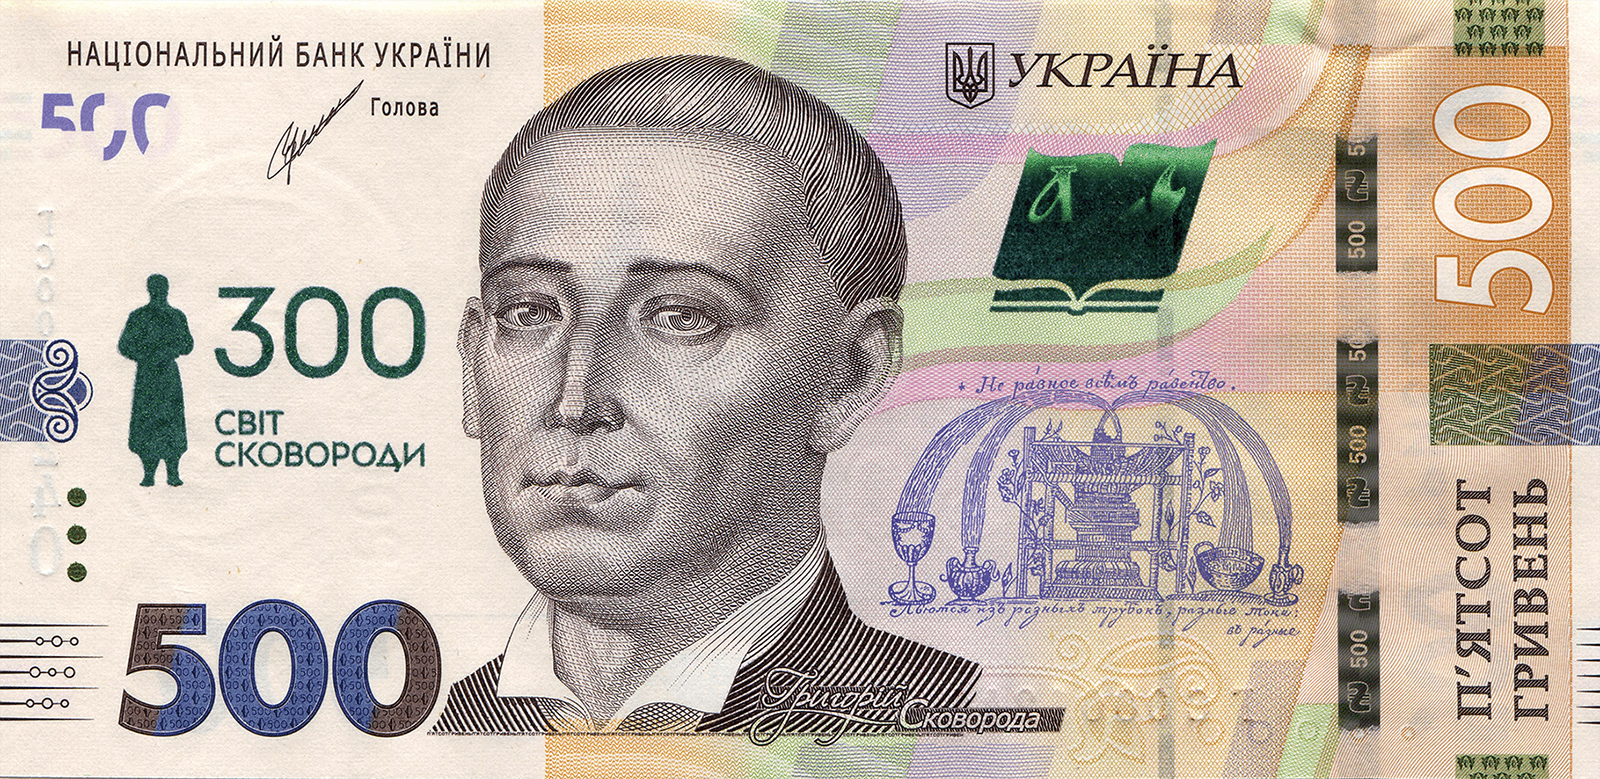 Banknote (in an envelope) replicating the 500 hryvnia banknote designed in 2015 and commemorating the 300th anniversary of the birth of Hryhorii Skovoroda (obverse)